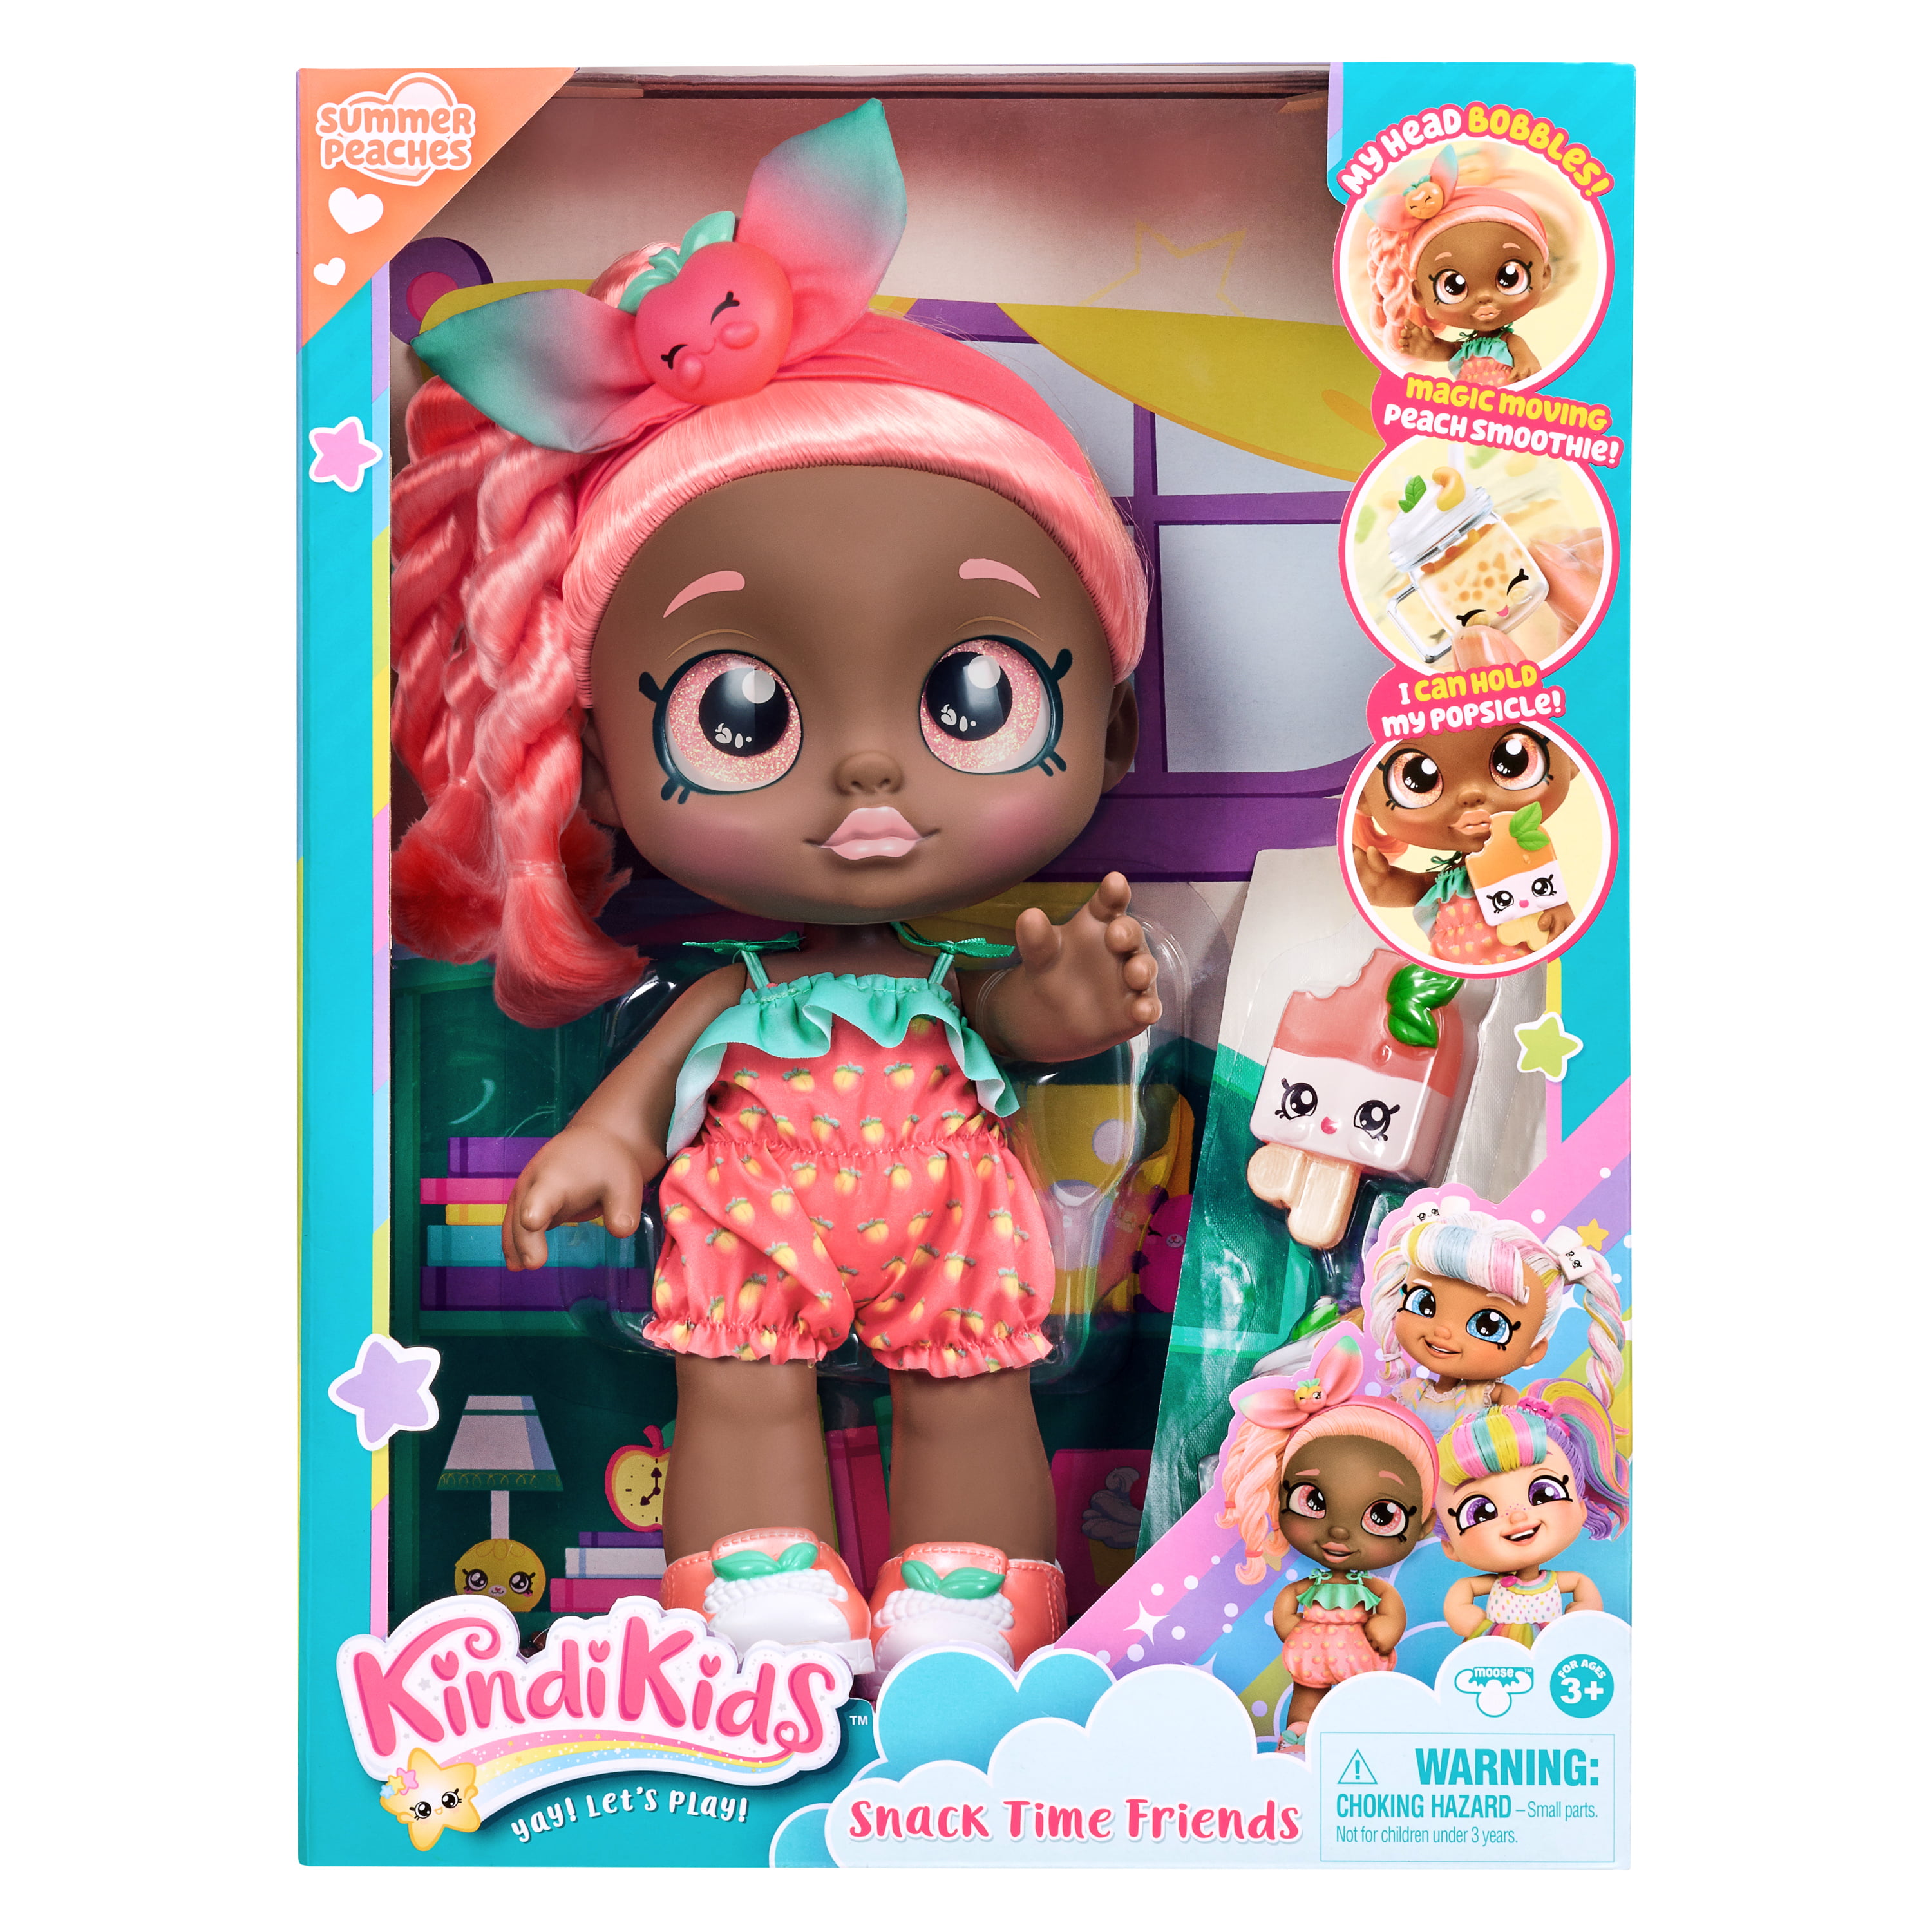 Summer Peaches Details about   Kindi Kids Snack Time Friends Pre-School 10 inch Doll New 2020 